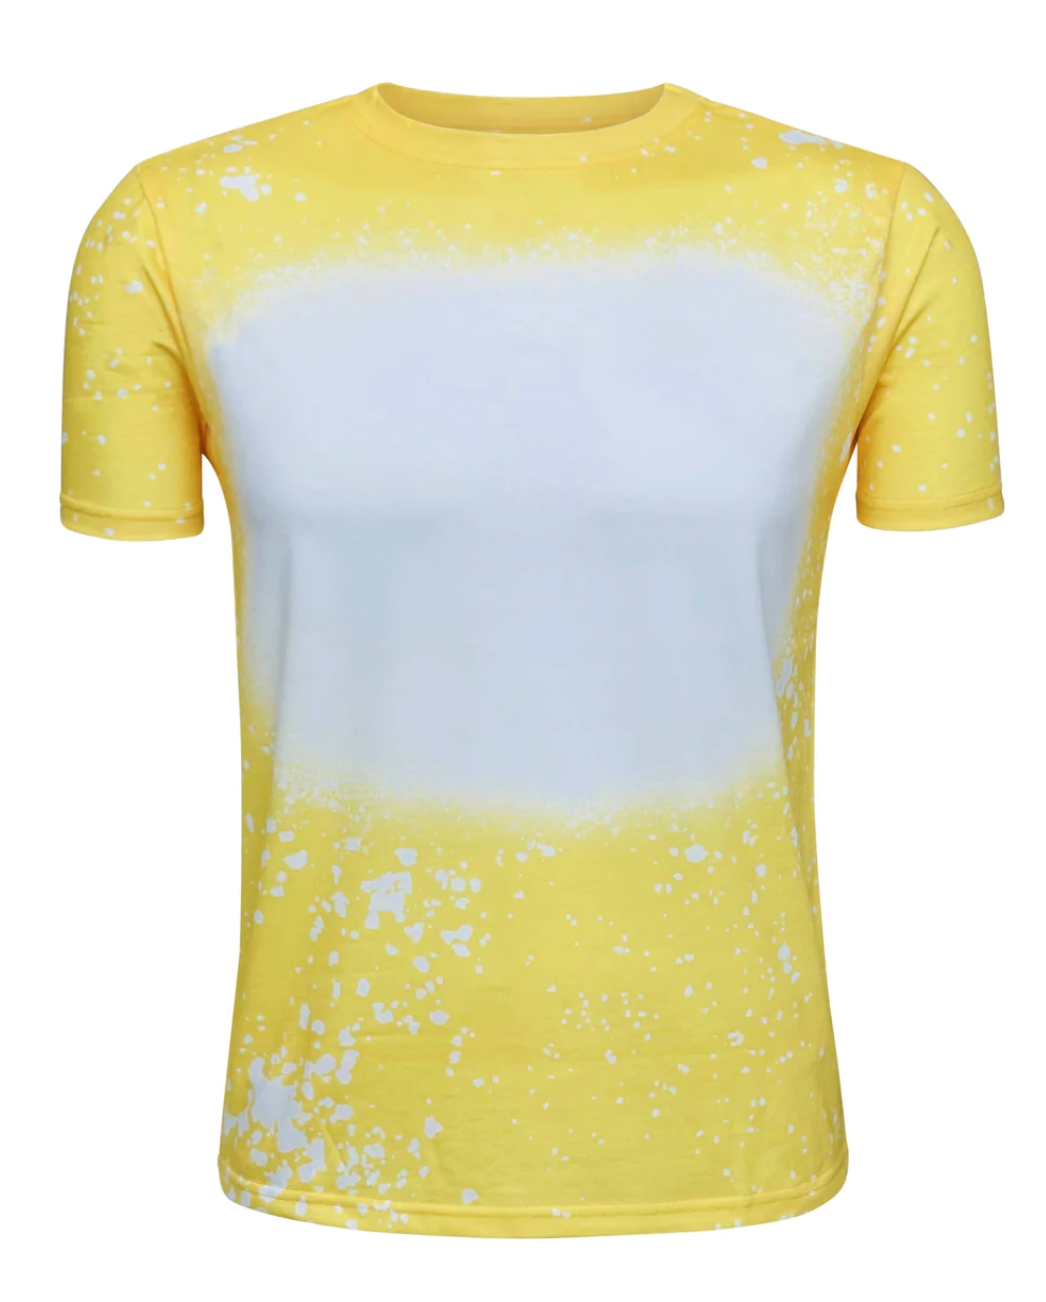 Unisex Faux Bleached Shirts, ready for Sublimation or Screen Transfer